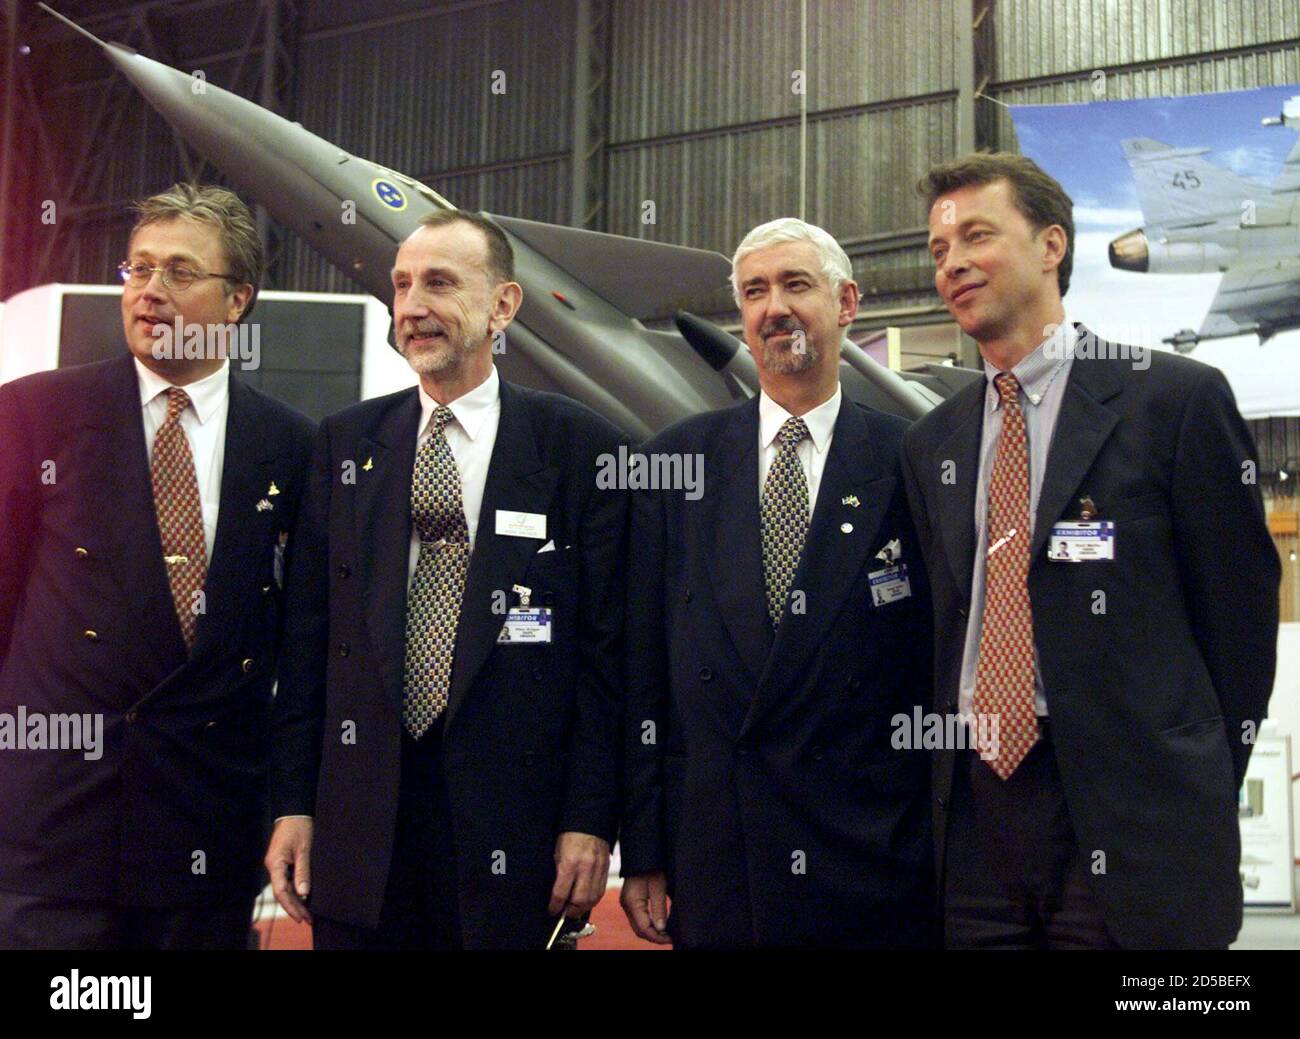 Members of the SAAB Gripen, Magnus Kalrberg (L) managing director of SAAB  Gripen in South Africa, Hans Kruger, Bengt Halse Saab Chief Executive (C)  and Kuell Moler (R) pose for photographs before